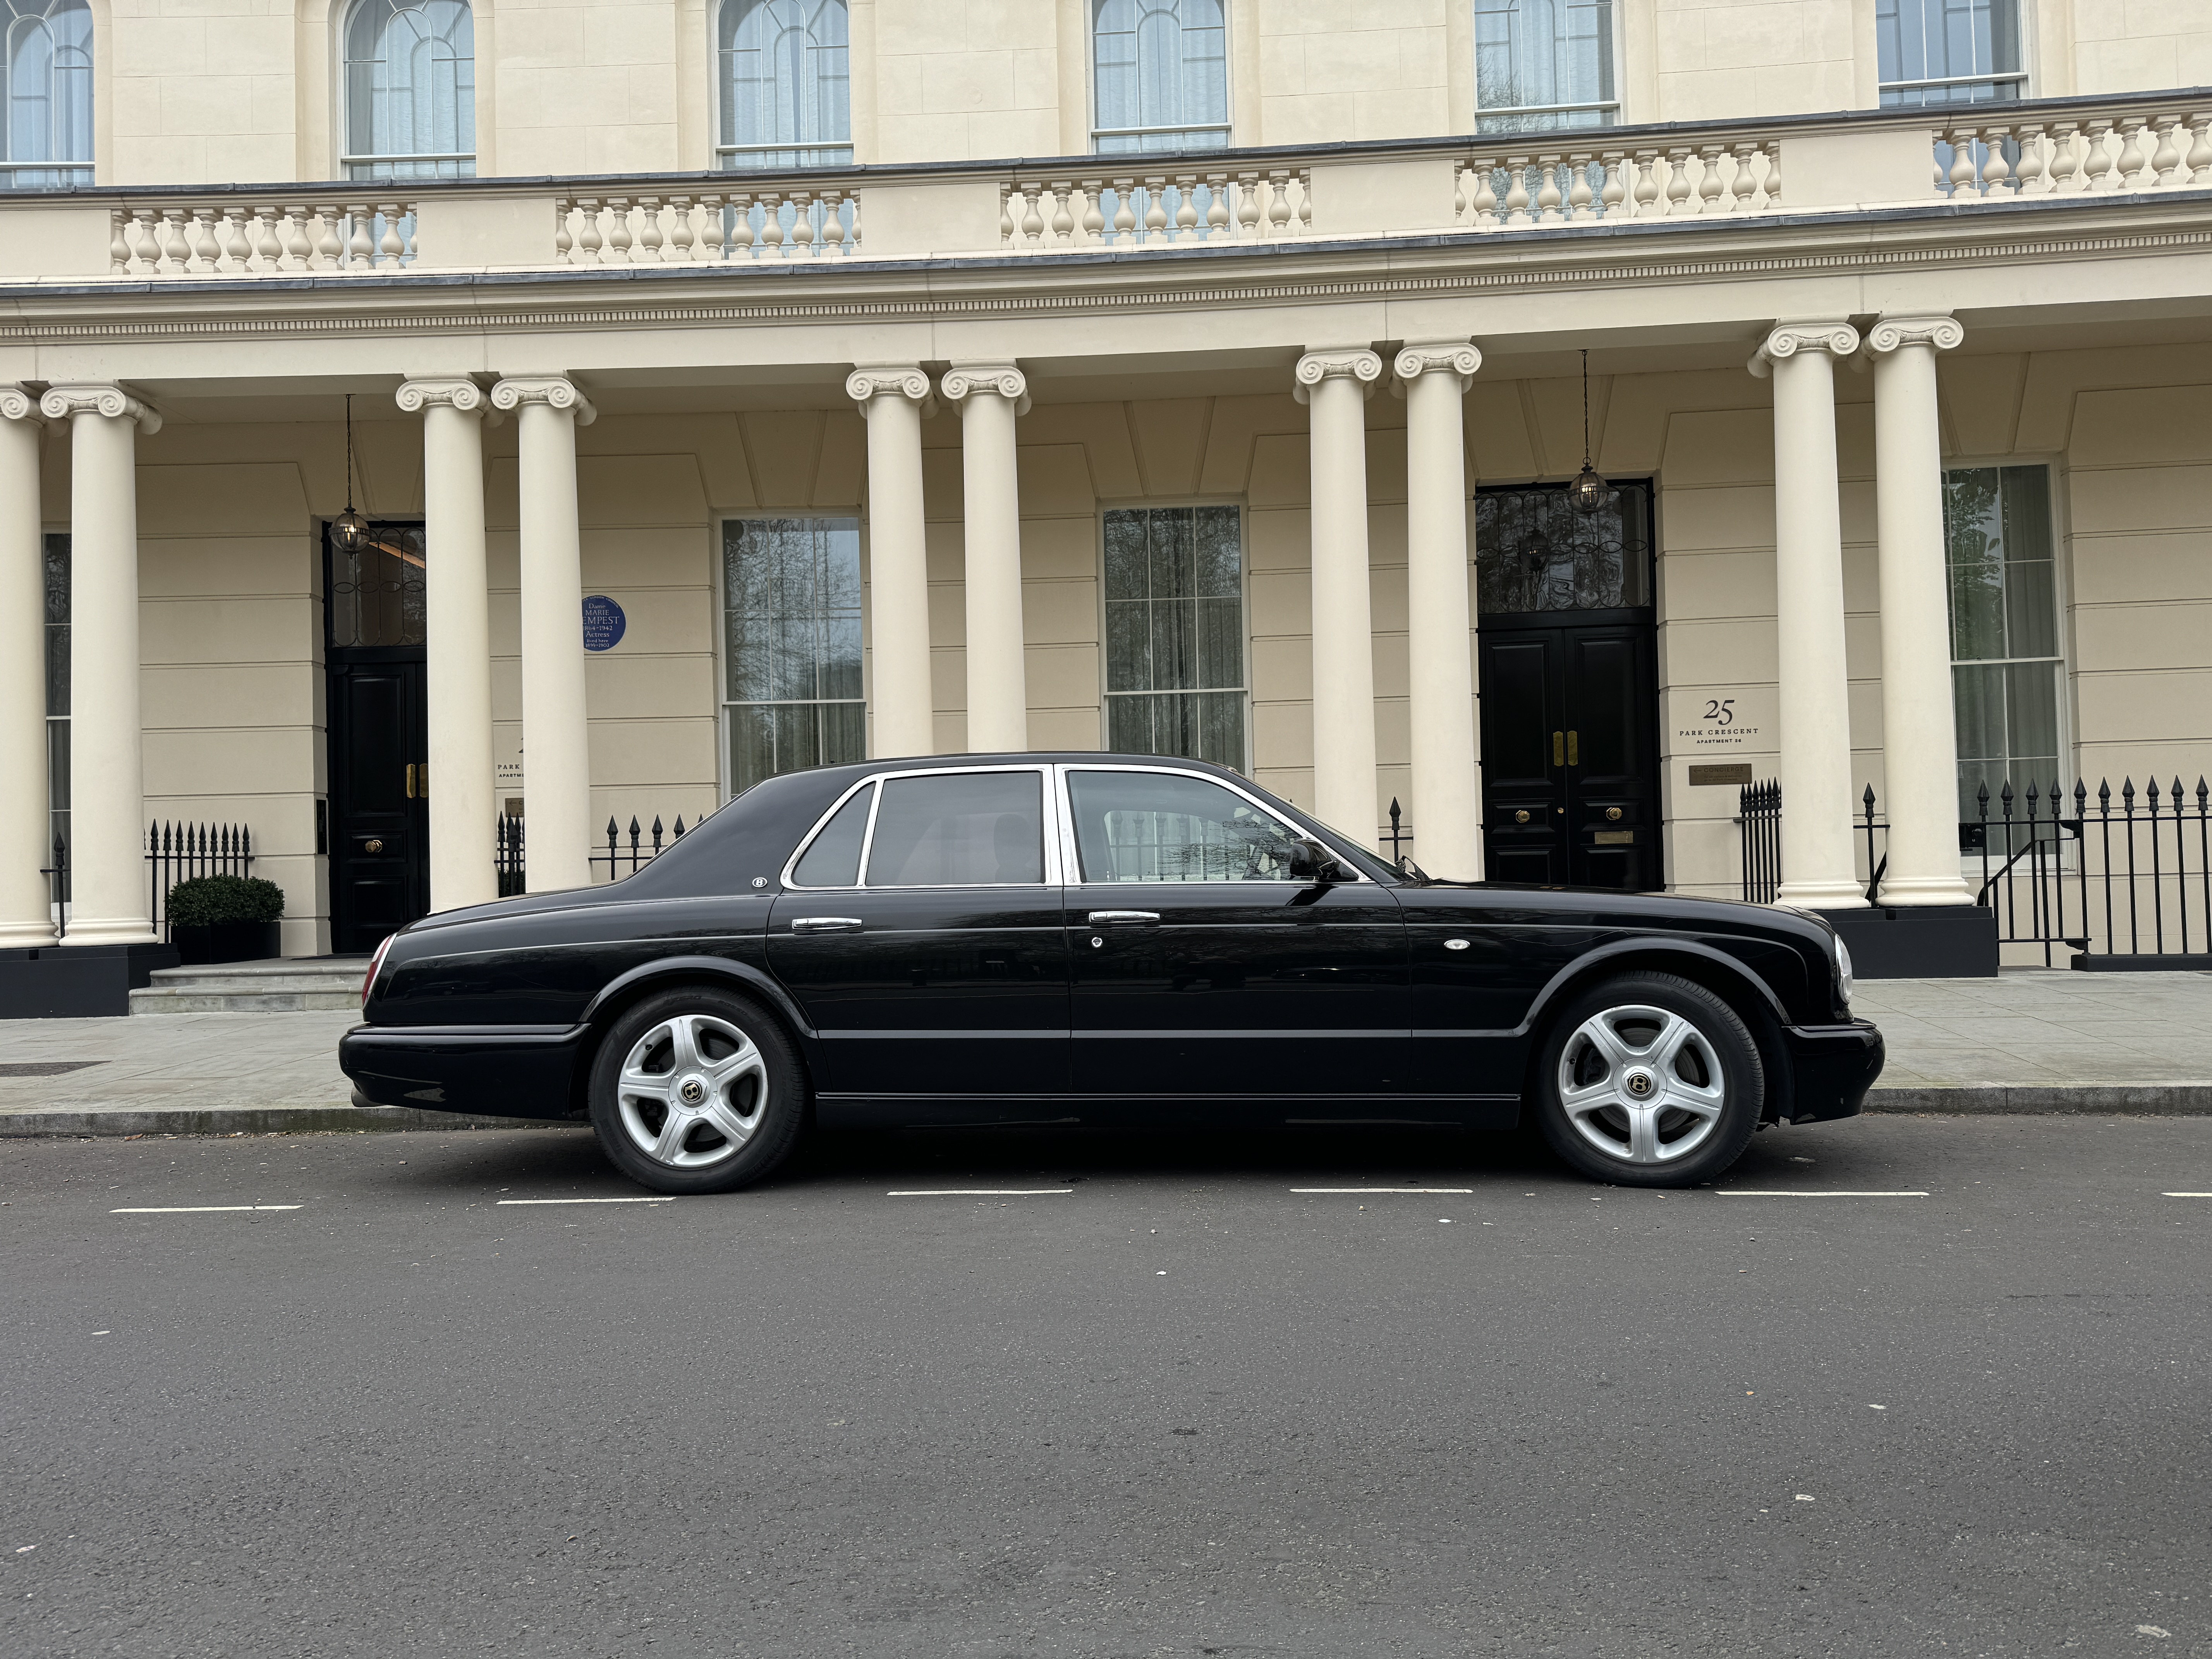 Bentley Arnage R, 6750cc V8 Twin Turbo, Black coachwork with matching black leather upholstery and